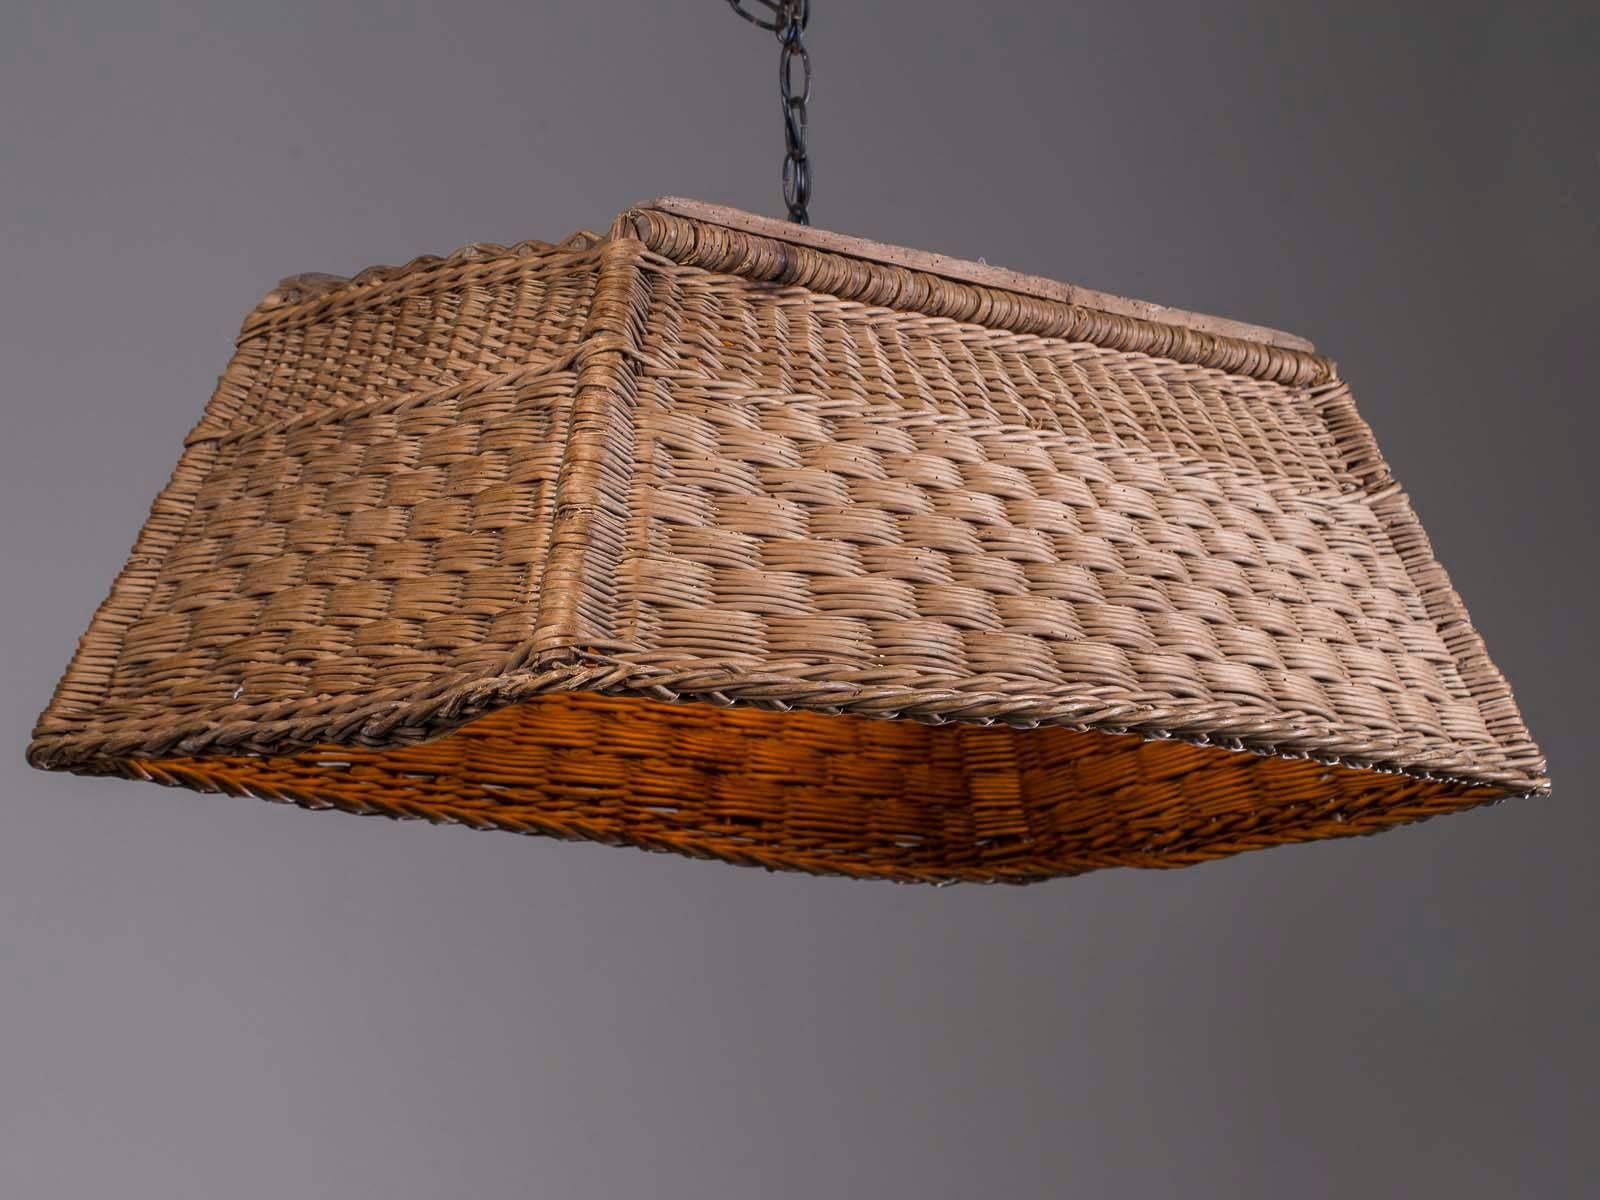 This handsome rectangular vintage French woven wicker basket chandelier from France circa 1920 features a custom made light fitted to the basket. The intriguing pattern of the wicker and its wooden frame are visible from all sides while the inside